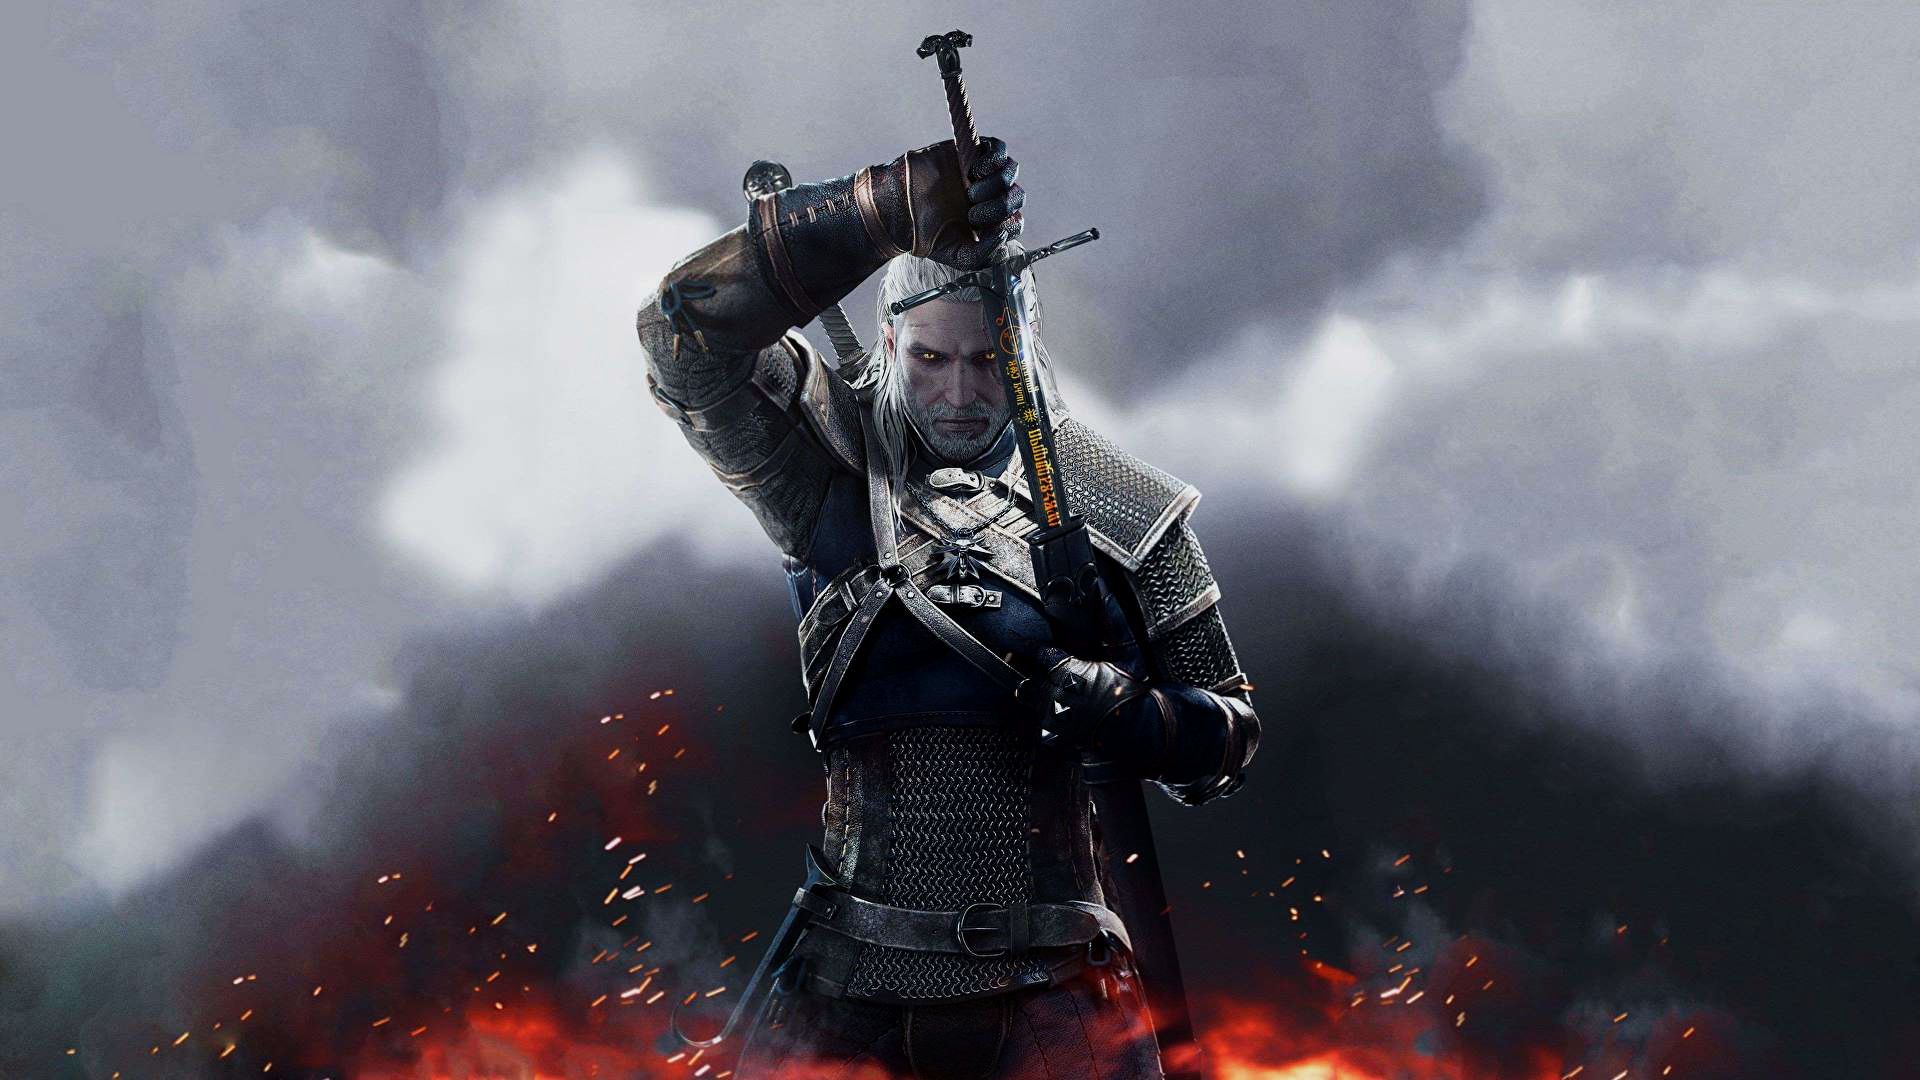 Image for The Witcher 3 next-gen development shifts to in-house, postponed until "further notice"